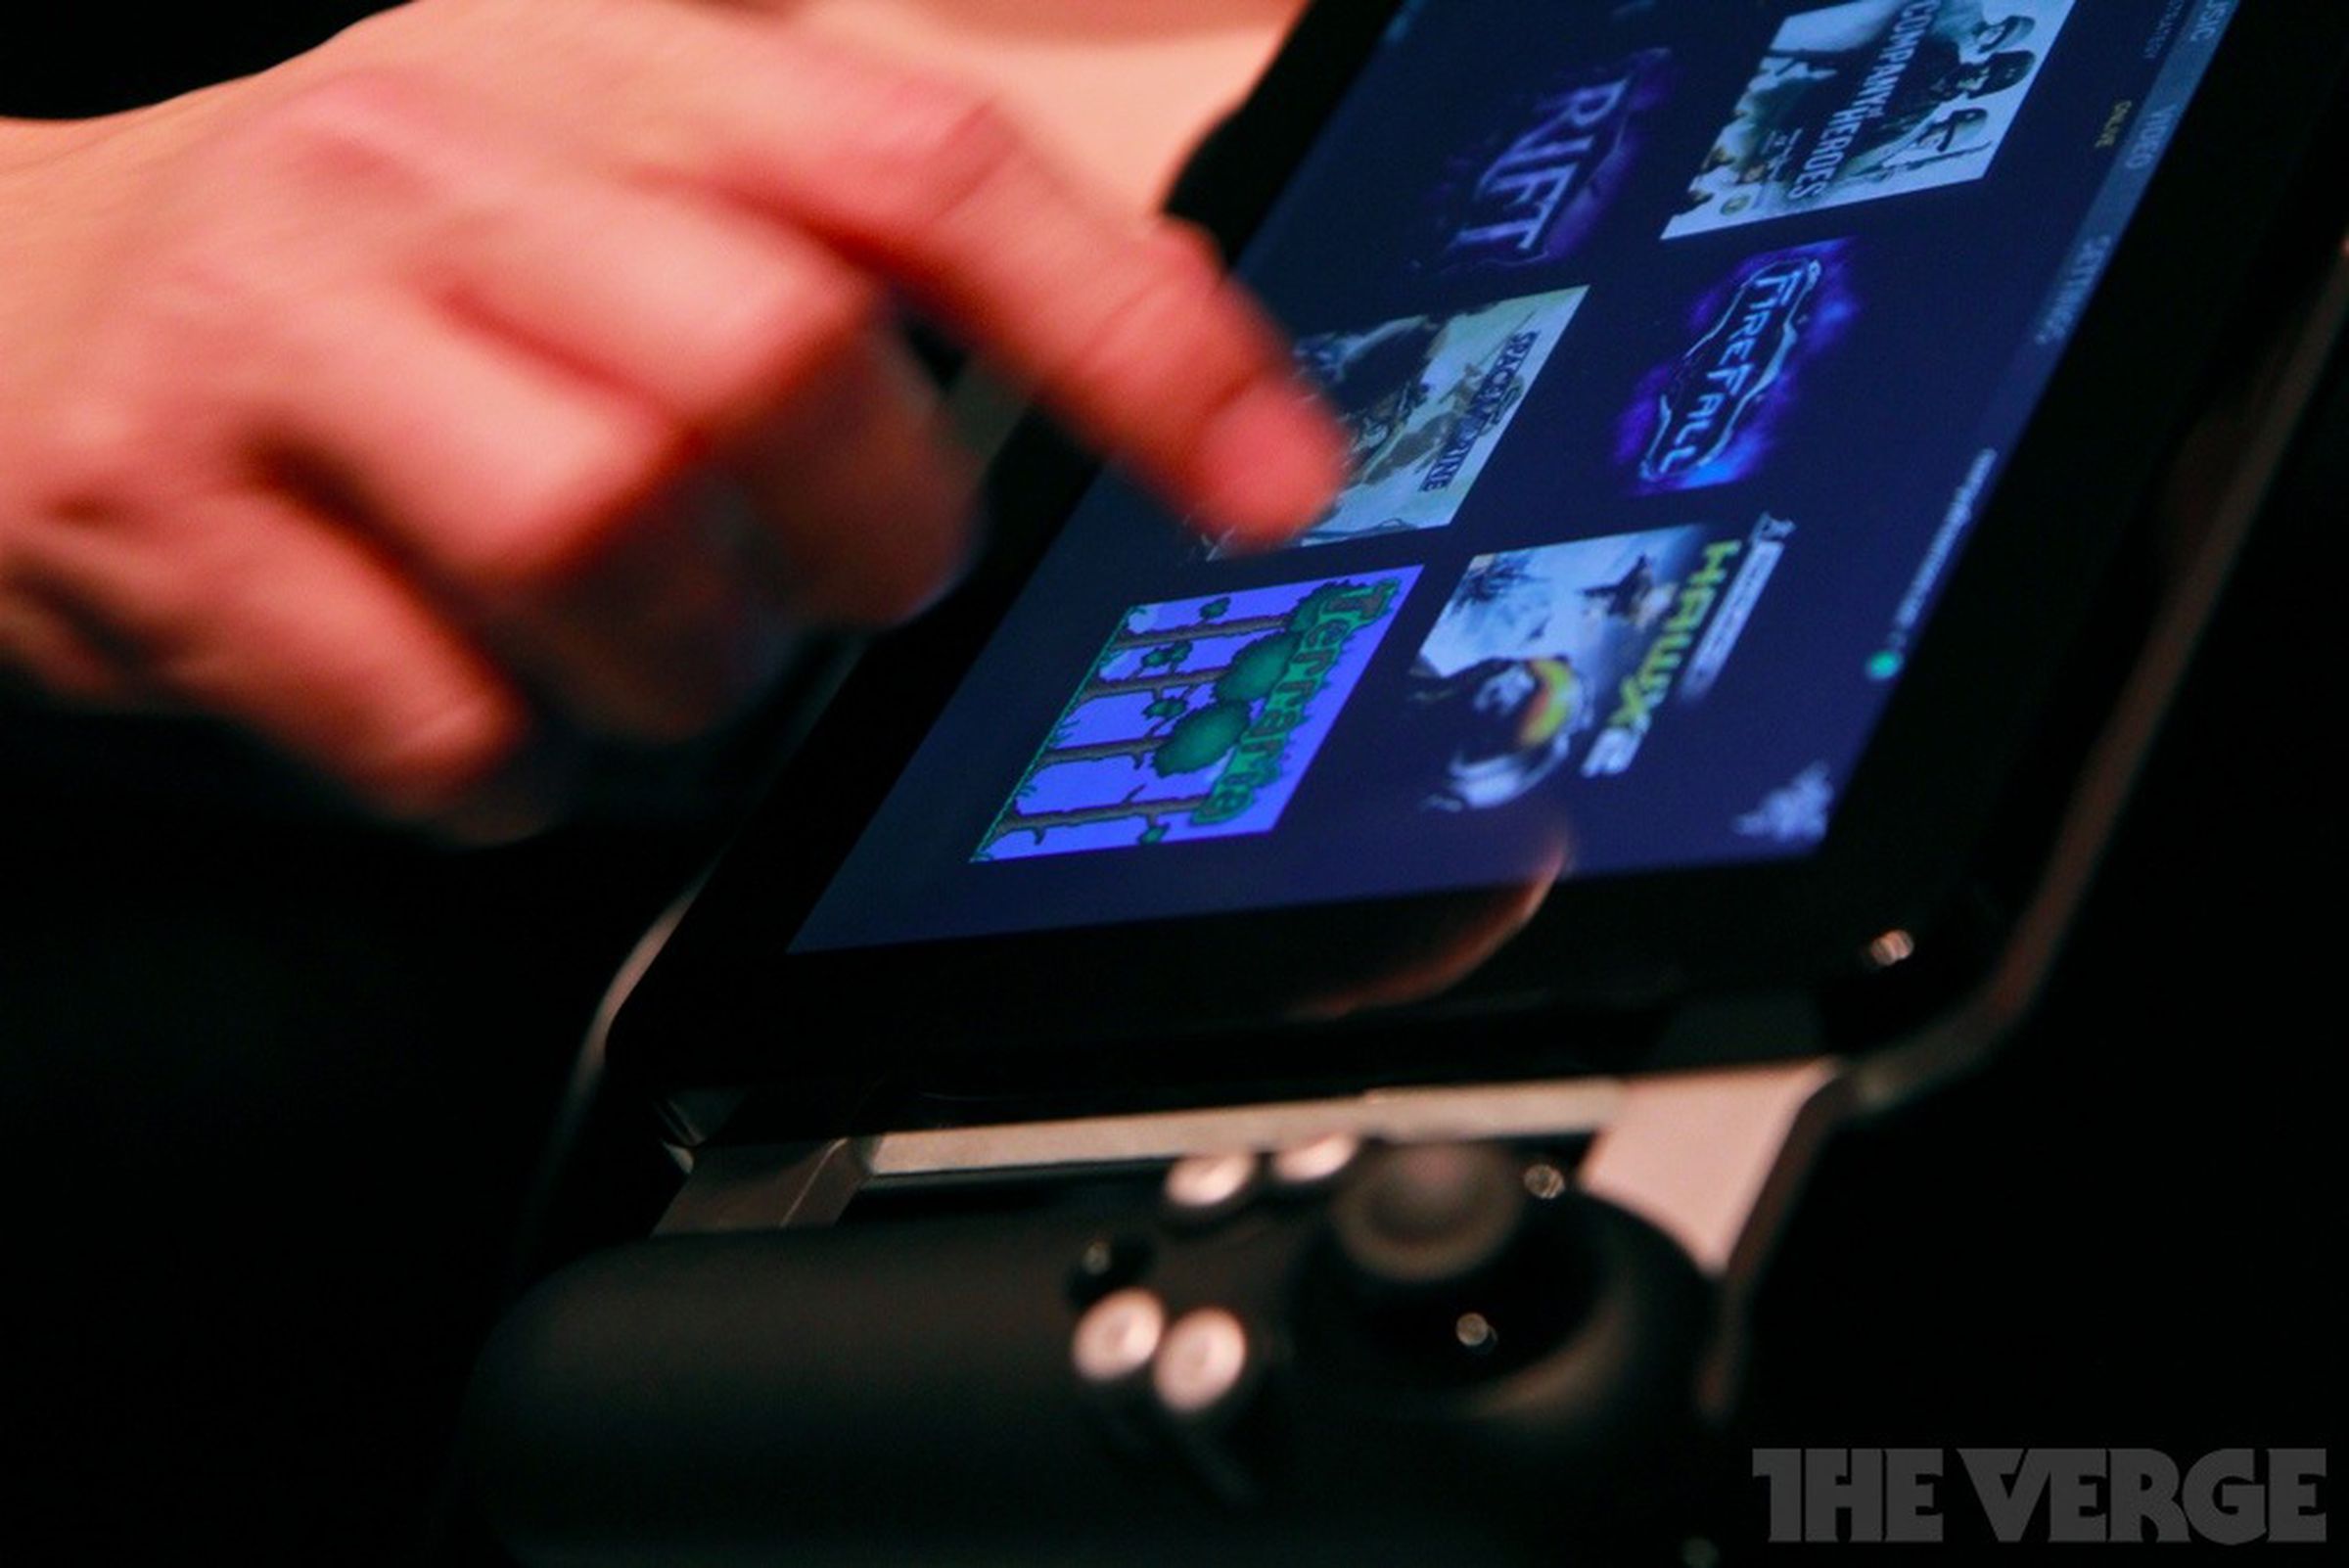 Razer Project Fiona gaming tablet first hands-on pictures